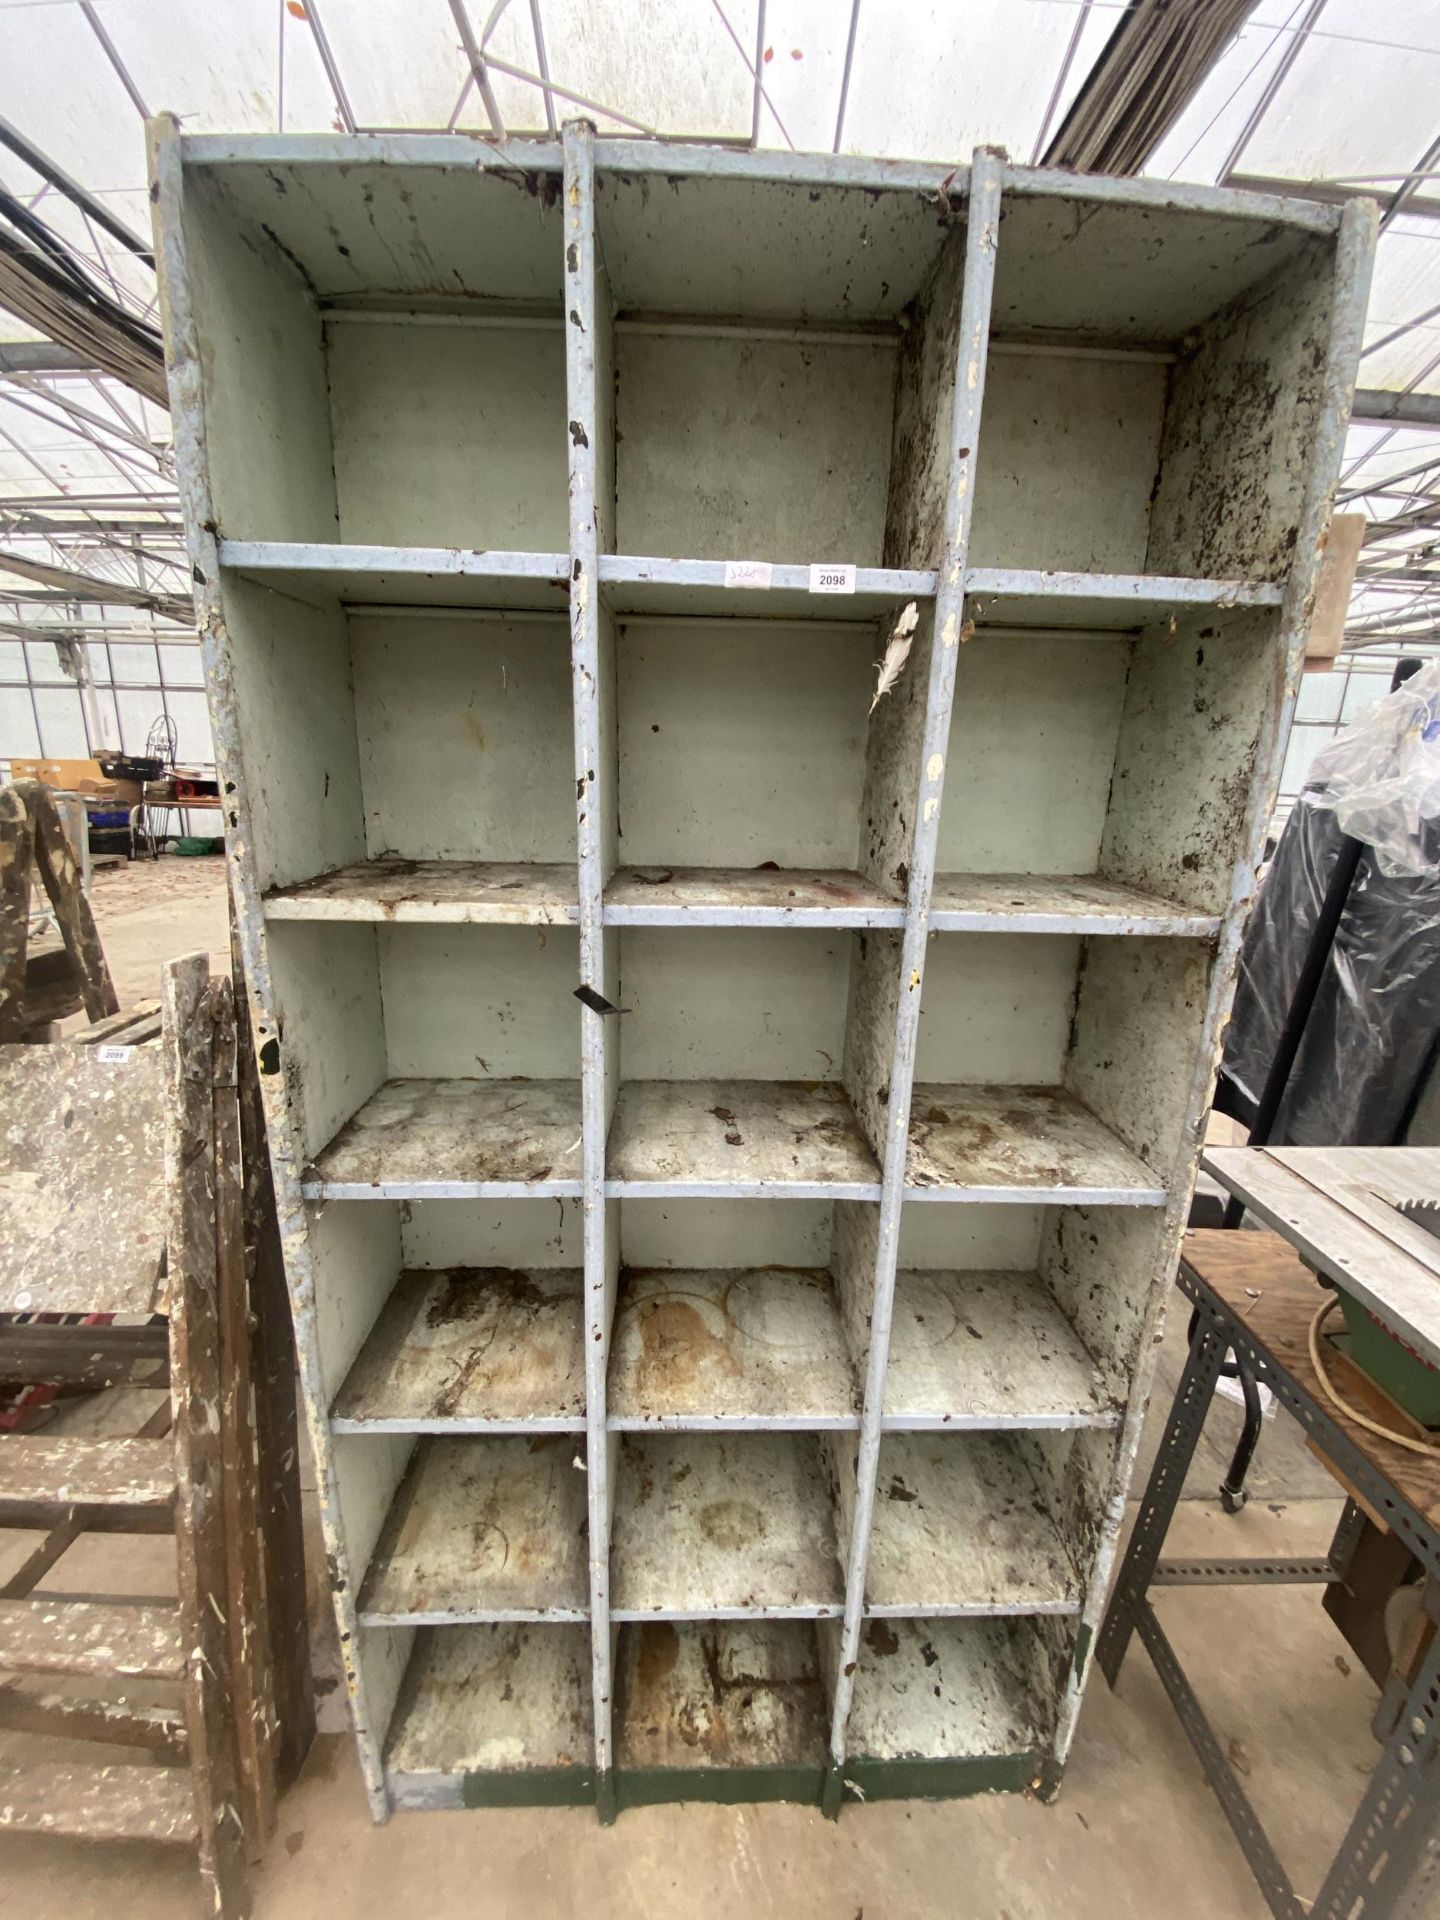 AN 18 SECTION METAL PIGEON HOLE STORAGE UNIT - Image 2 of 2